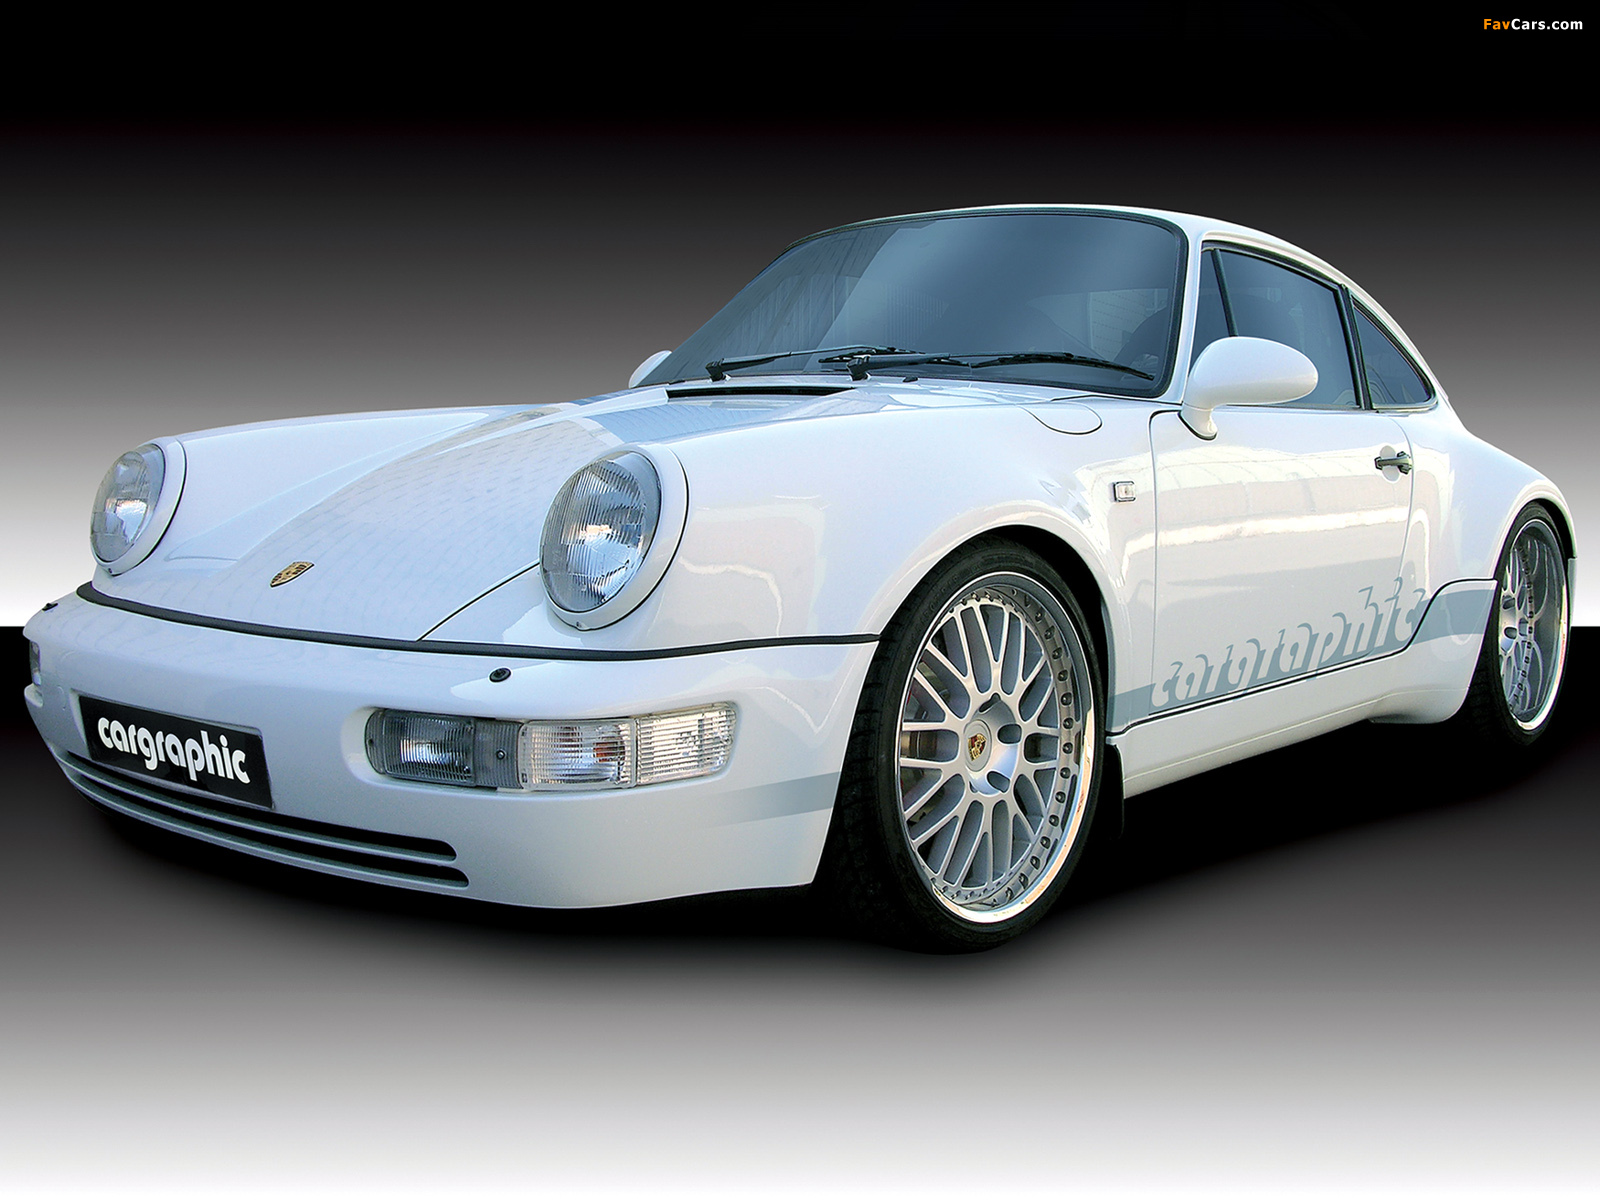 Images of Cargraphic Porsche 911 Turbo (964) (1600 x 1200)